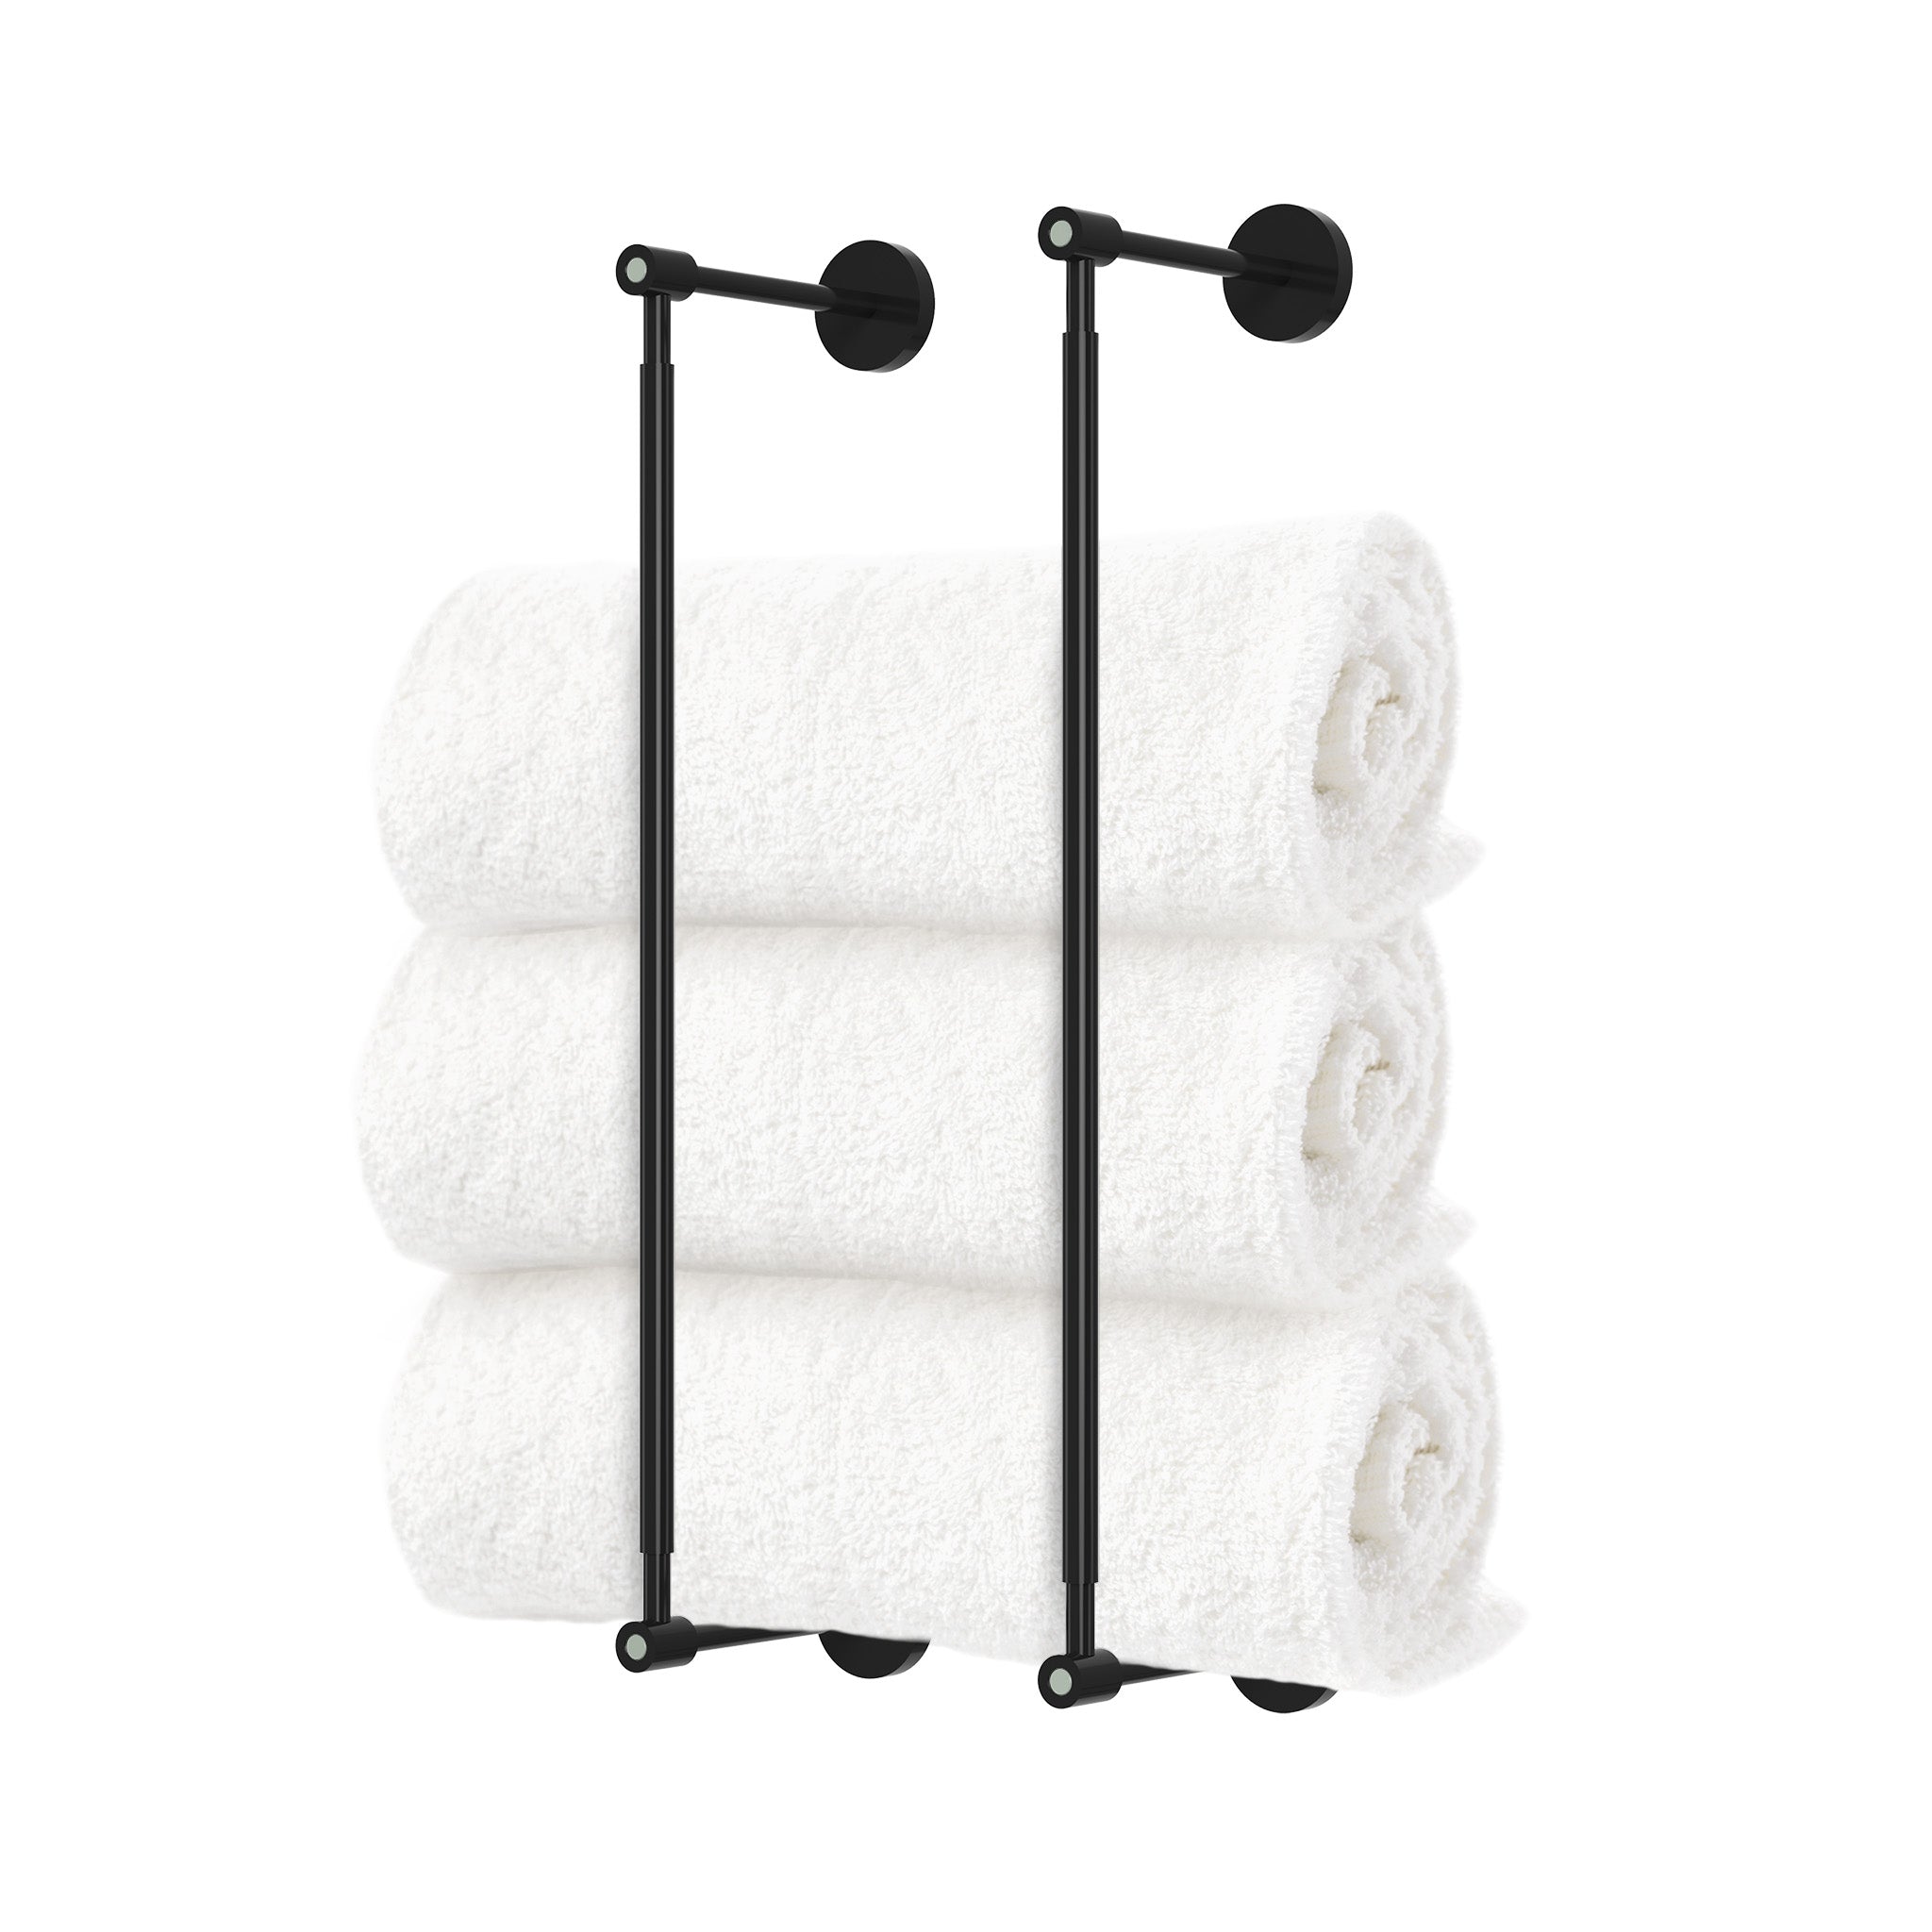 Black and spa head towel rack 18 inch dutton brown hardware